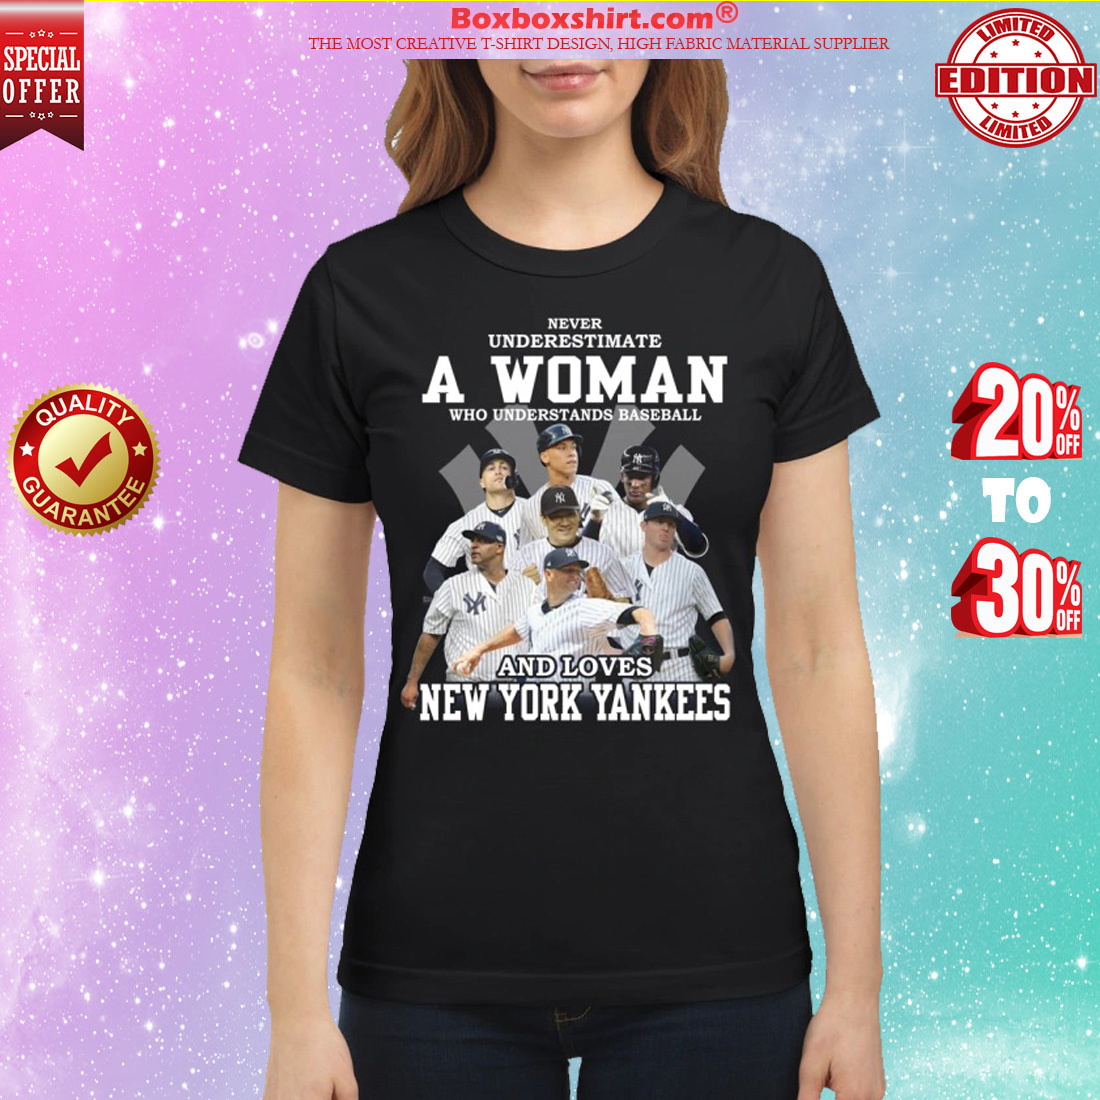 Never underestimate a woman who understands baseball and loves New York Yankees classic shirt